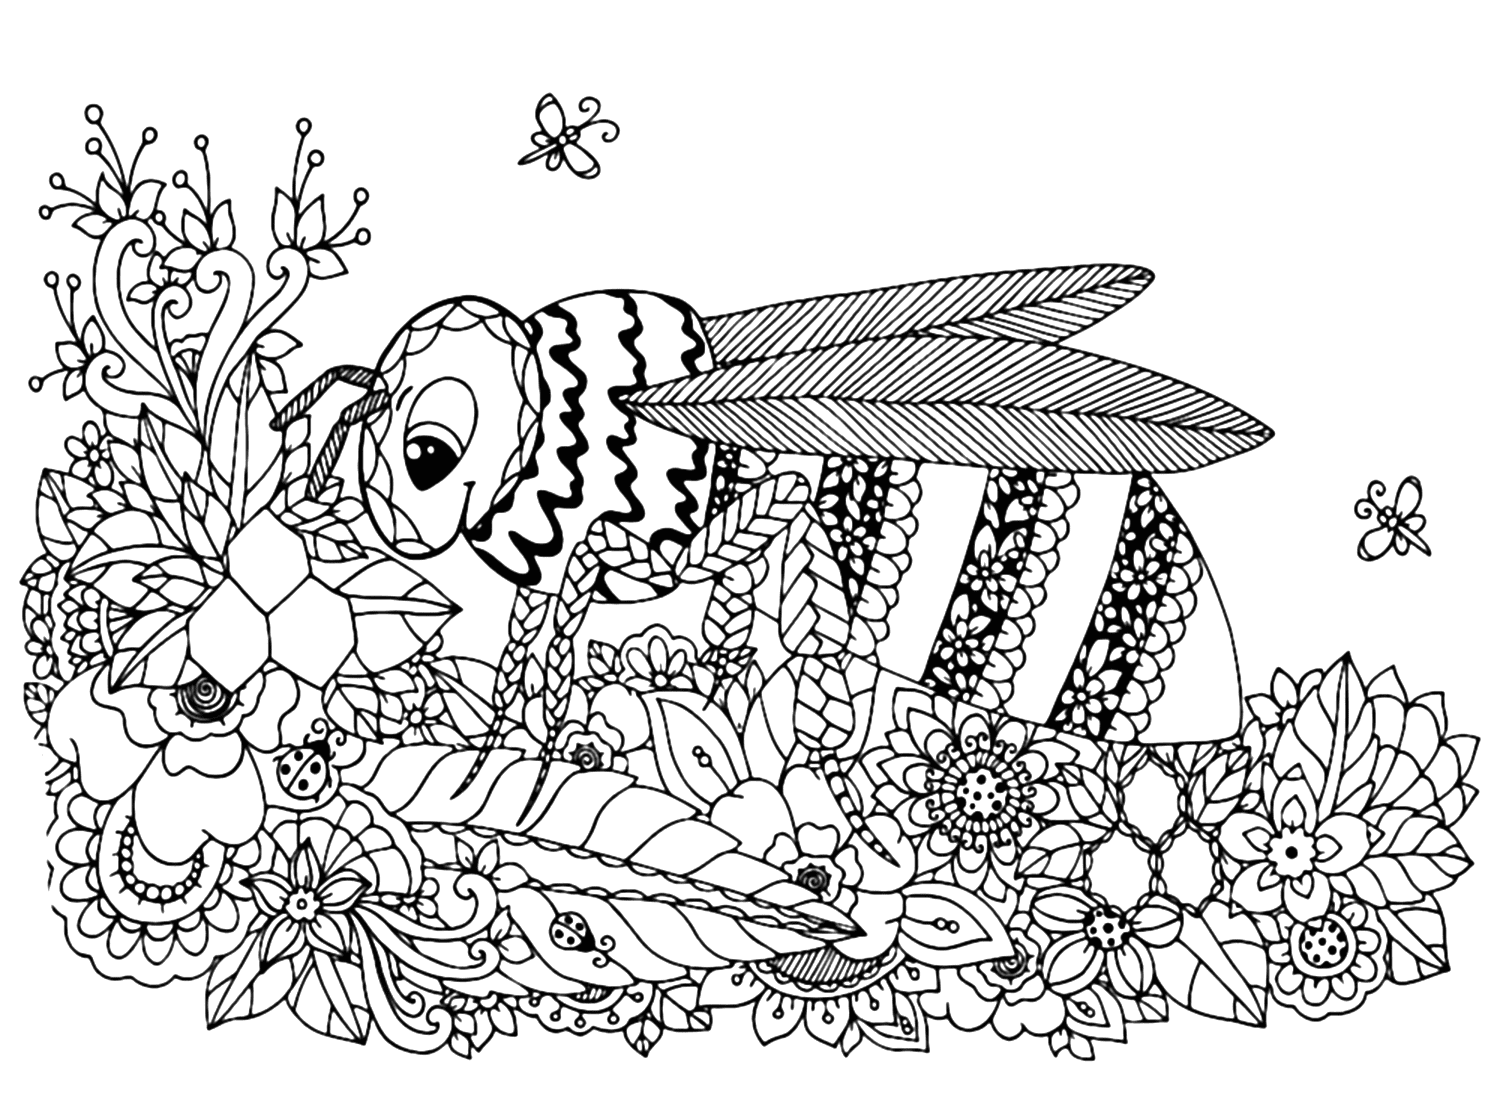 Wasp Coloring Sheet For Adults from Wasp